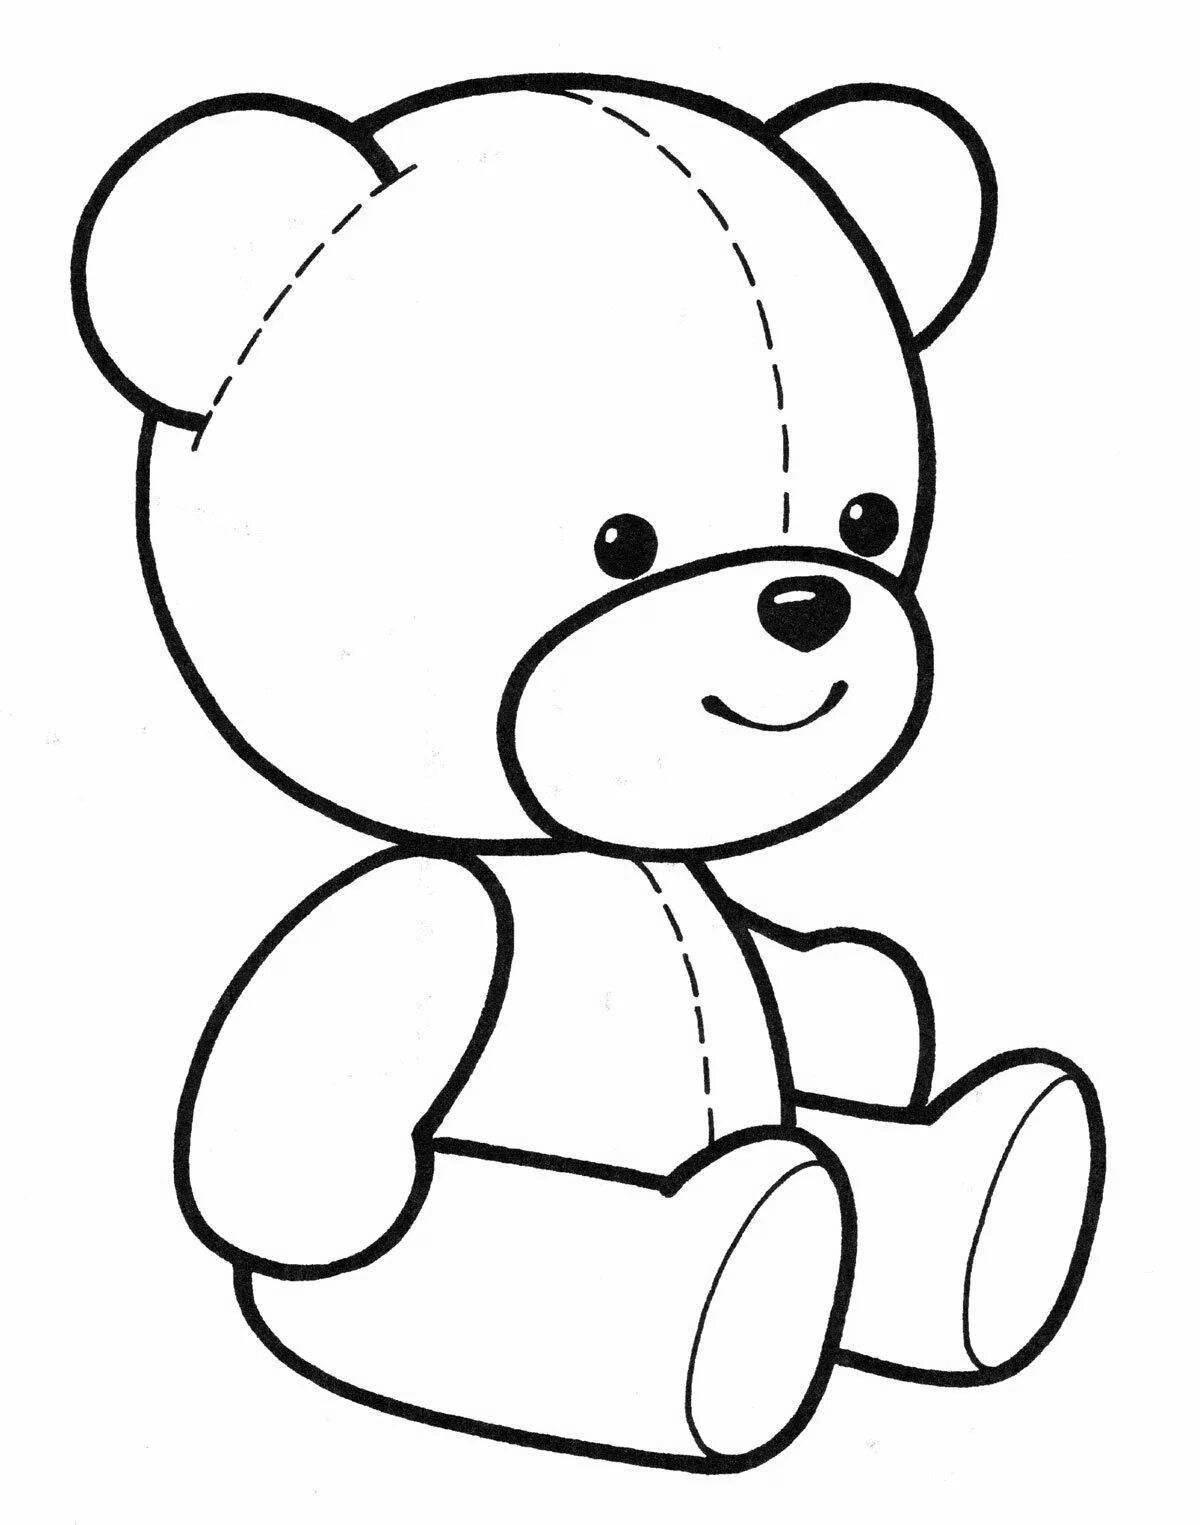 Exquisite teddy bear coloring book